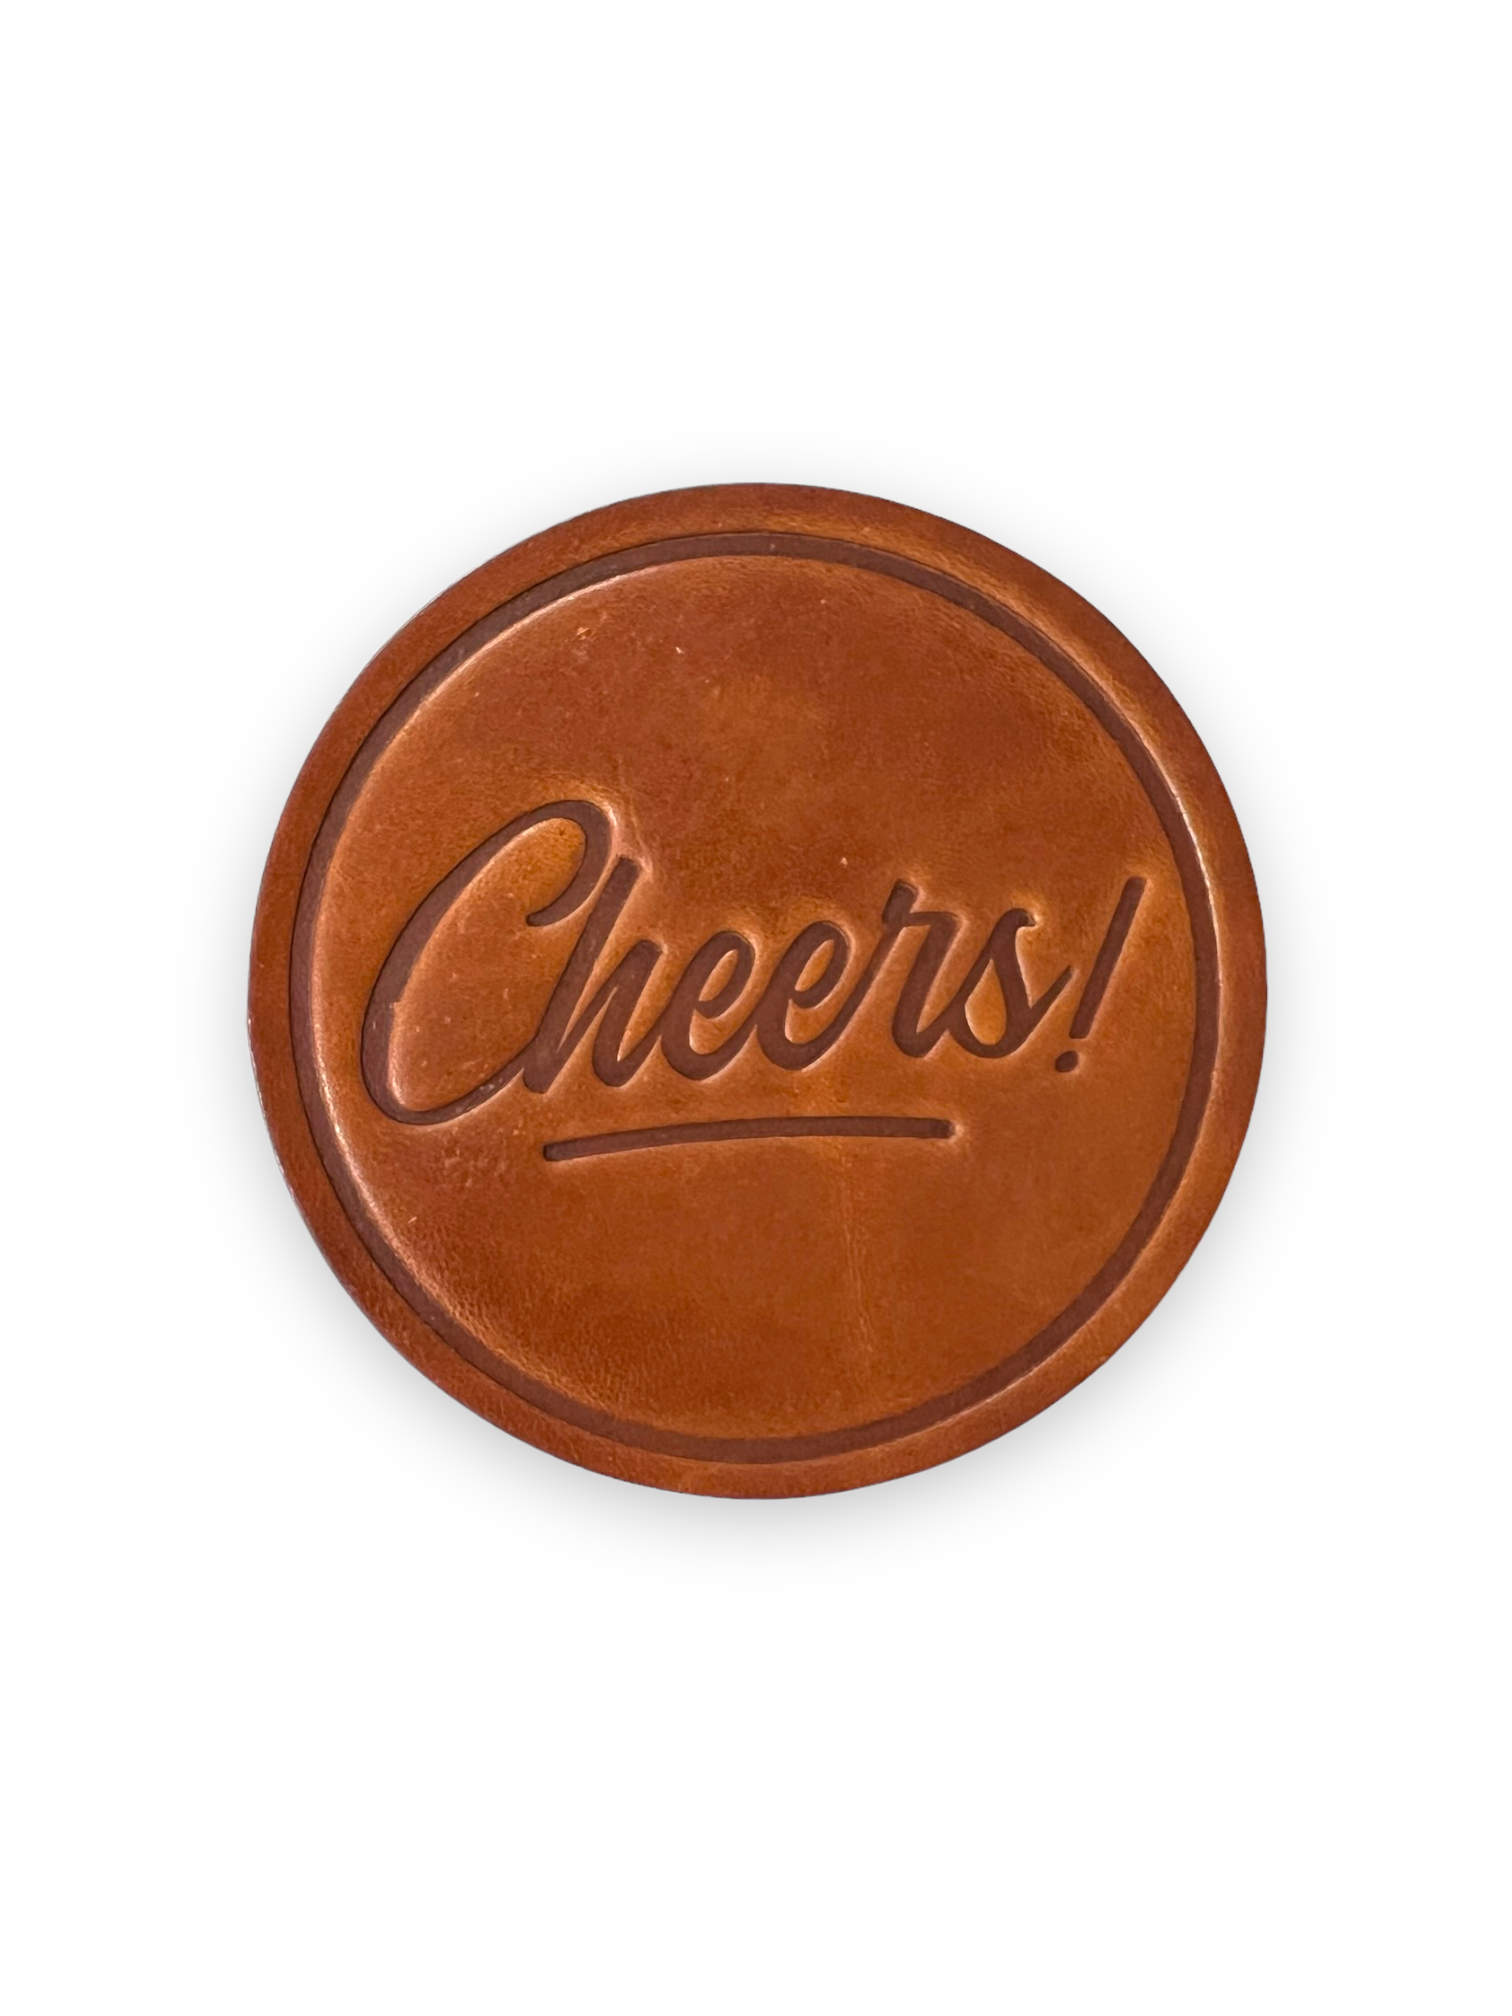 Cheers Genuine Leather Handstamped Coaster by Sugarhouse Leather Sold by Le Monkey House